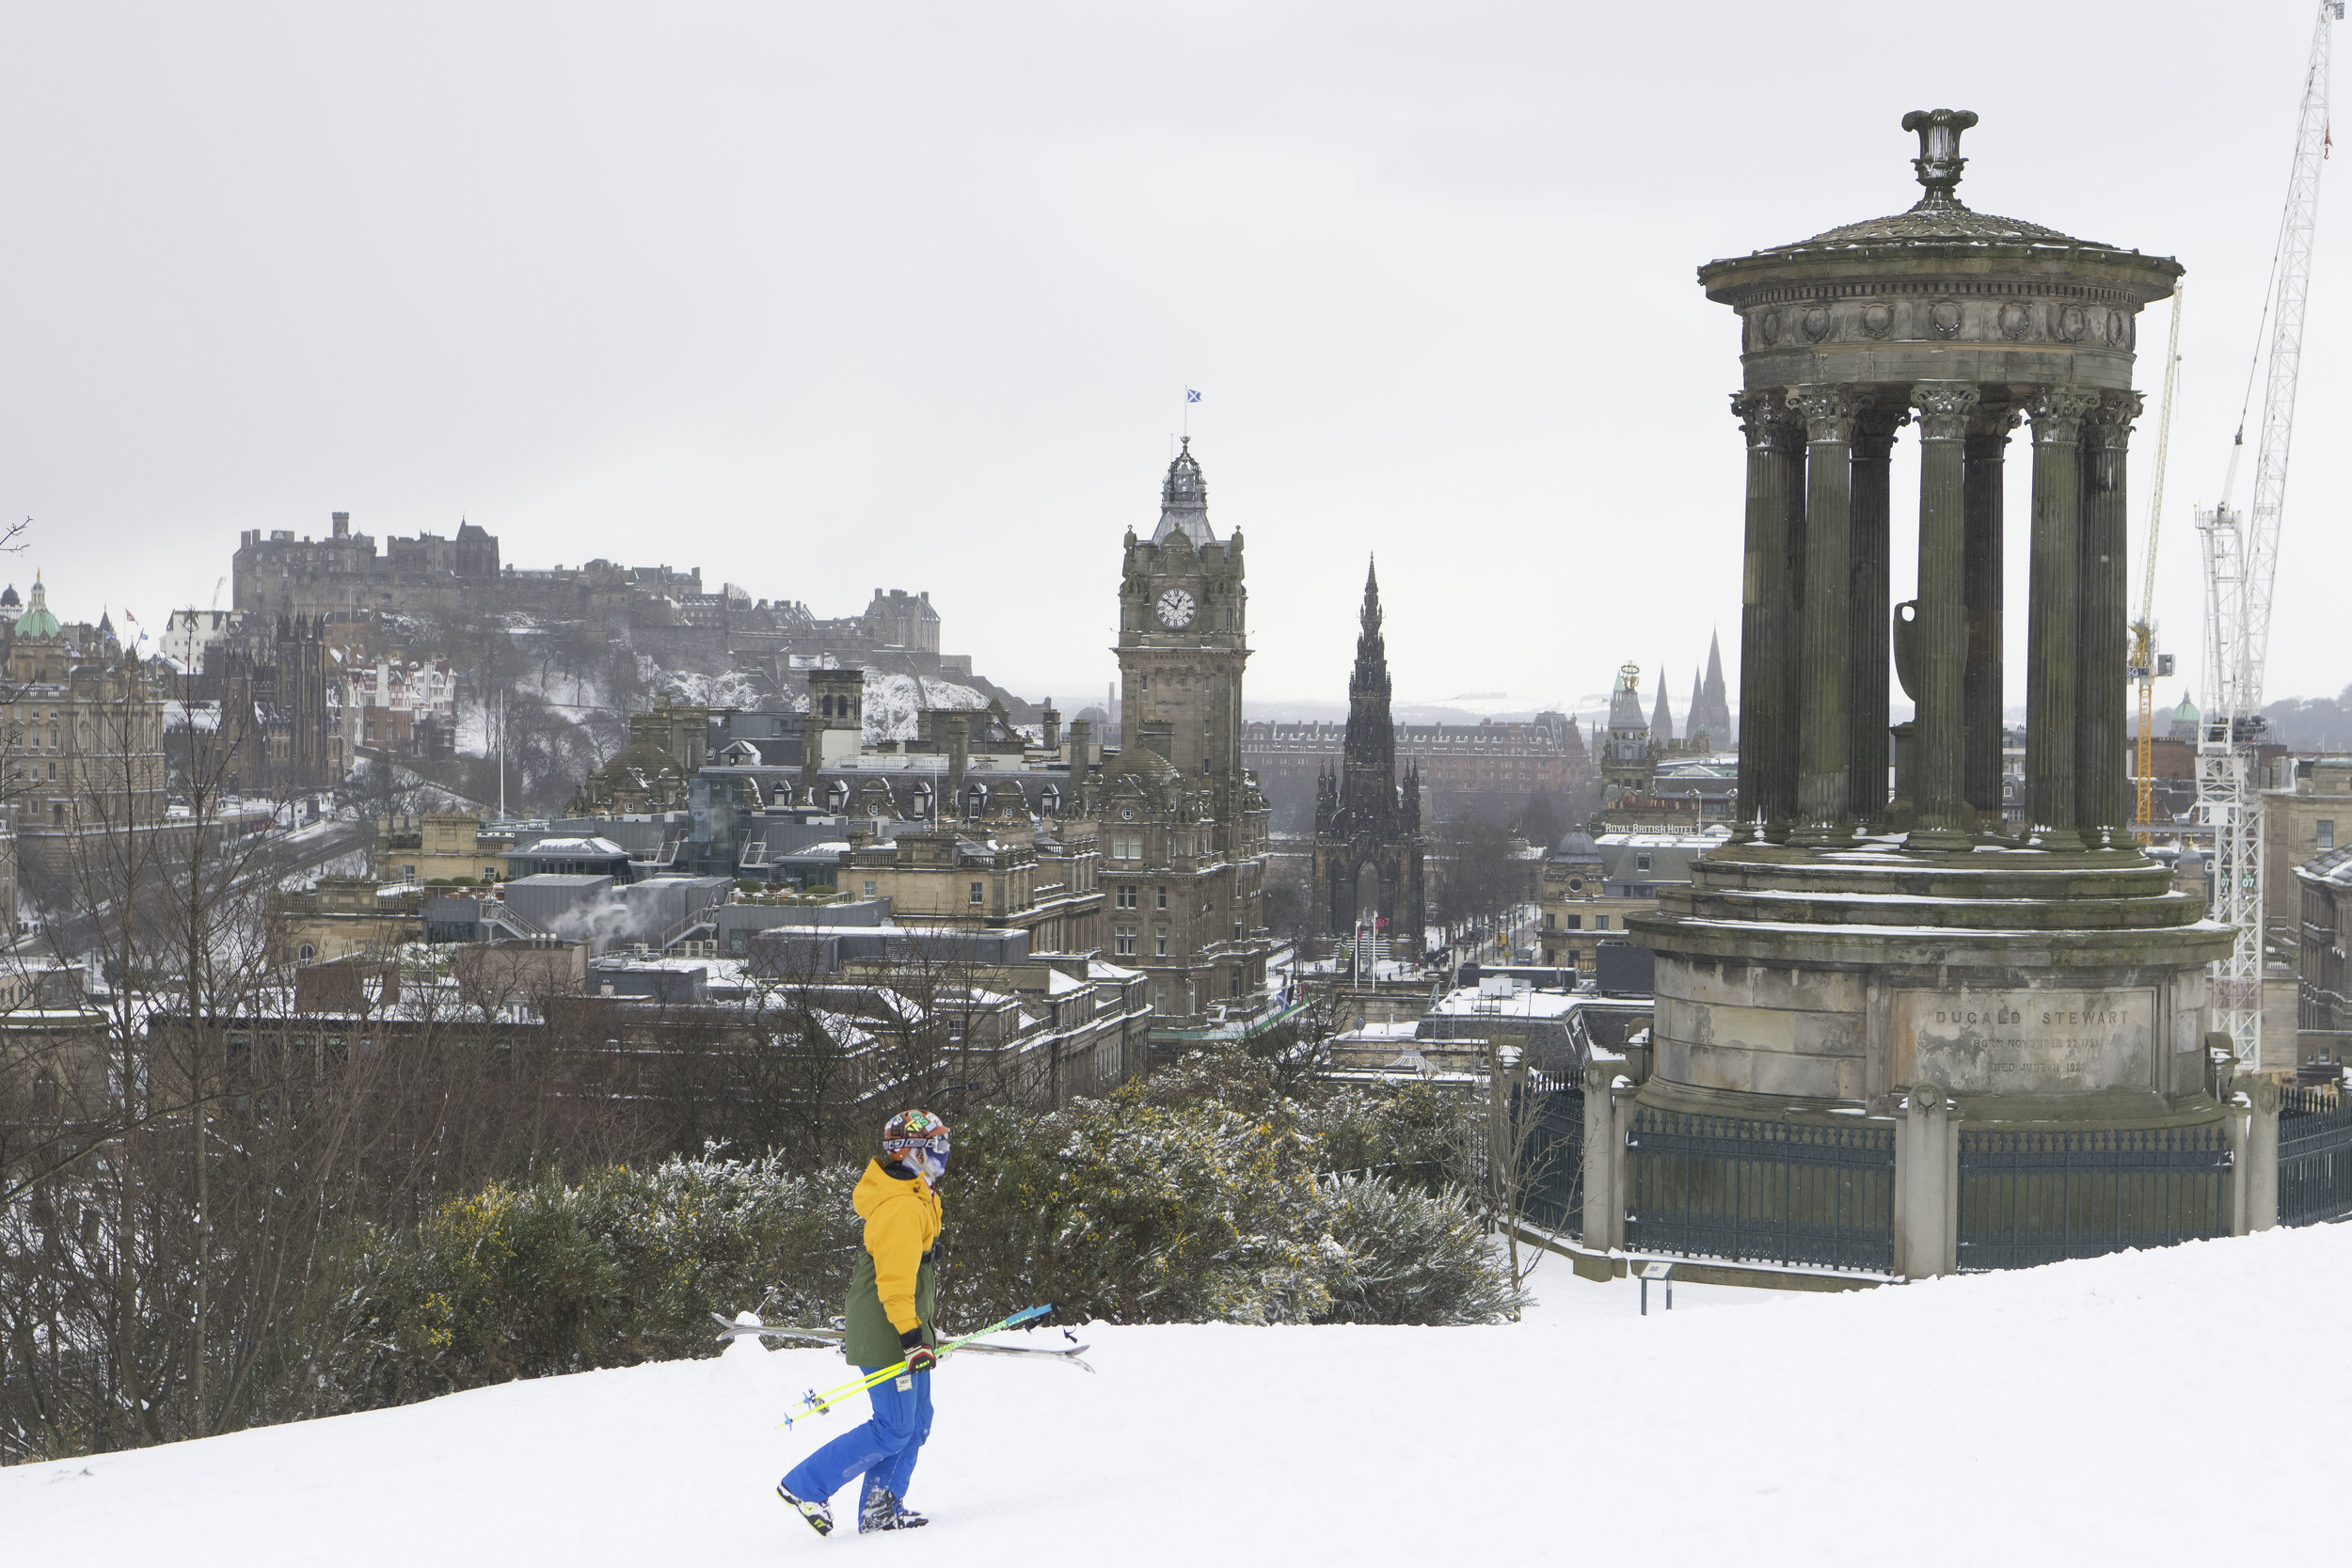  EDINBURGH, SCOTLAND - MARCH 1: A man with skis walks up Calton Hill which overlooks the city centre following heavy snowfall on March 1, 2018 in Edinburgh, United Kingdom. People have been warned not to make unnecessary journeys as the Met office is